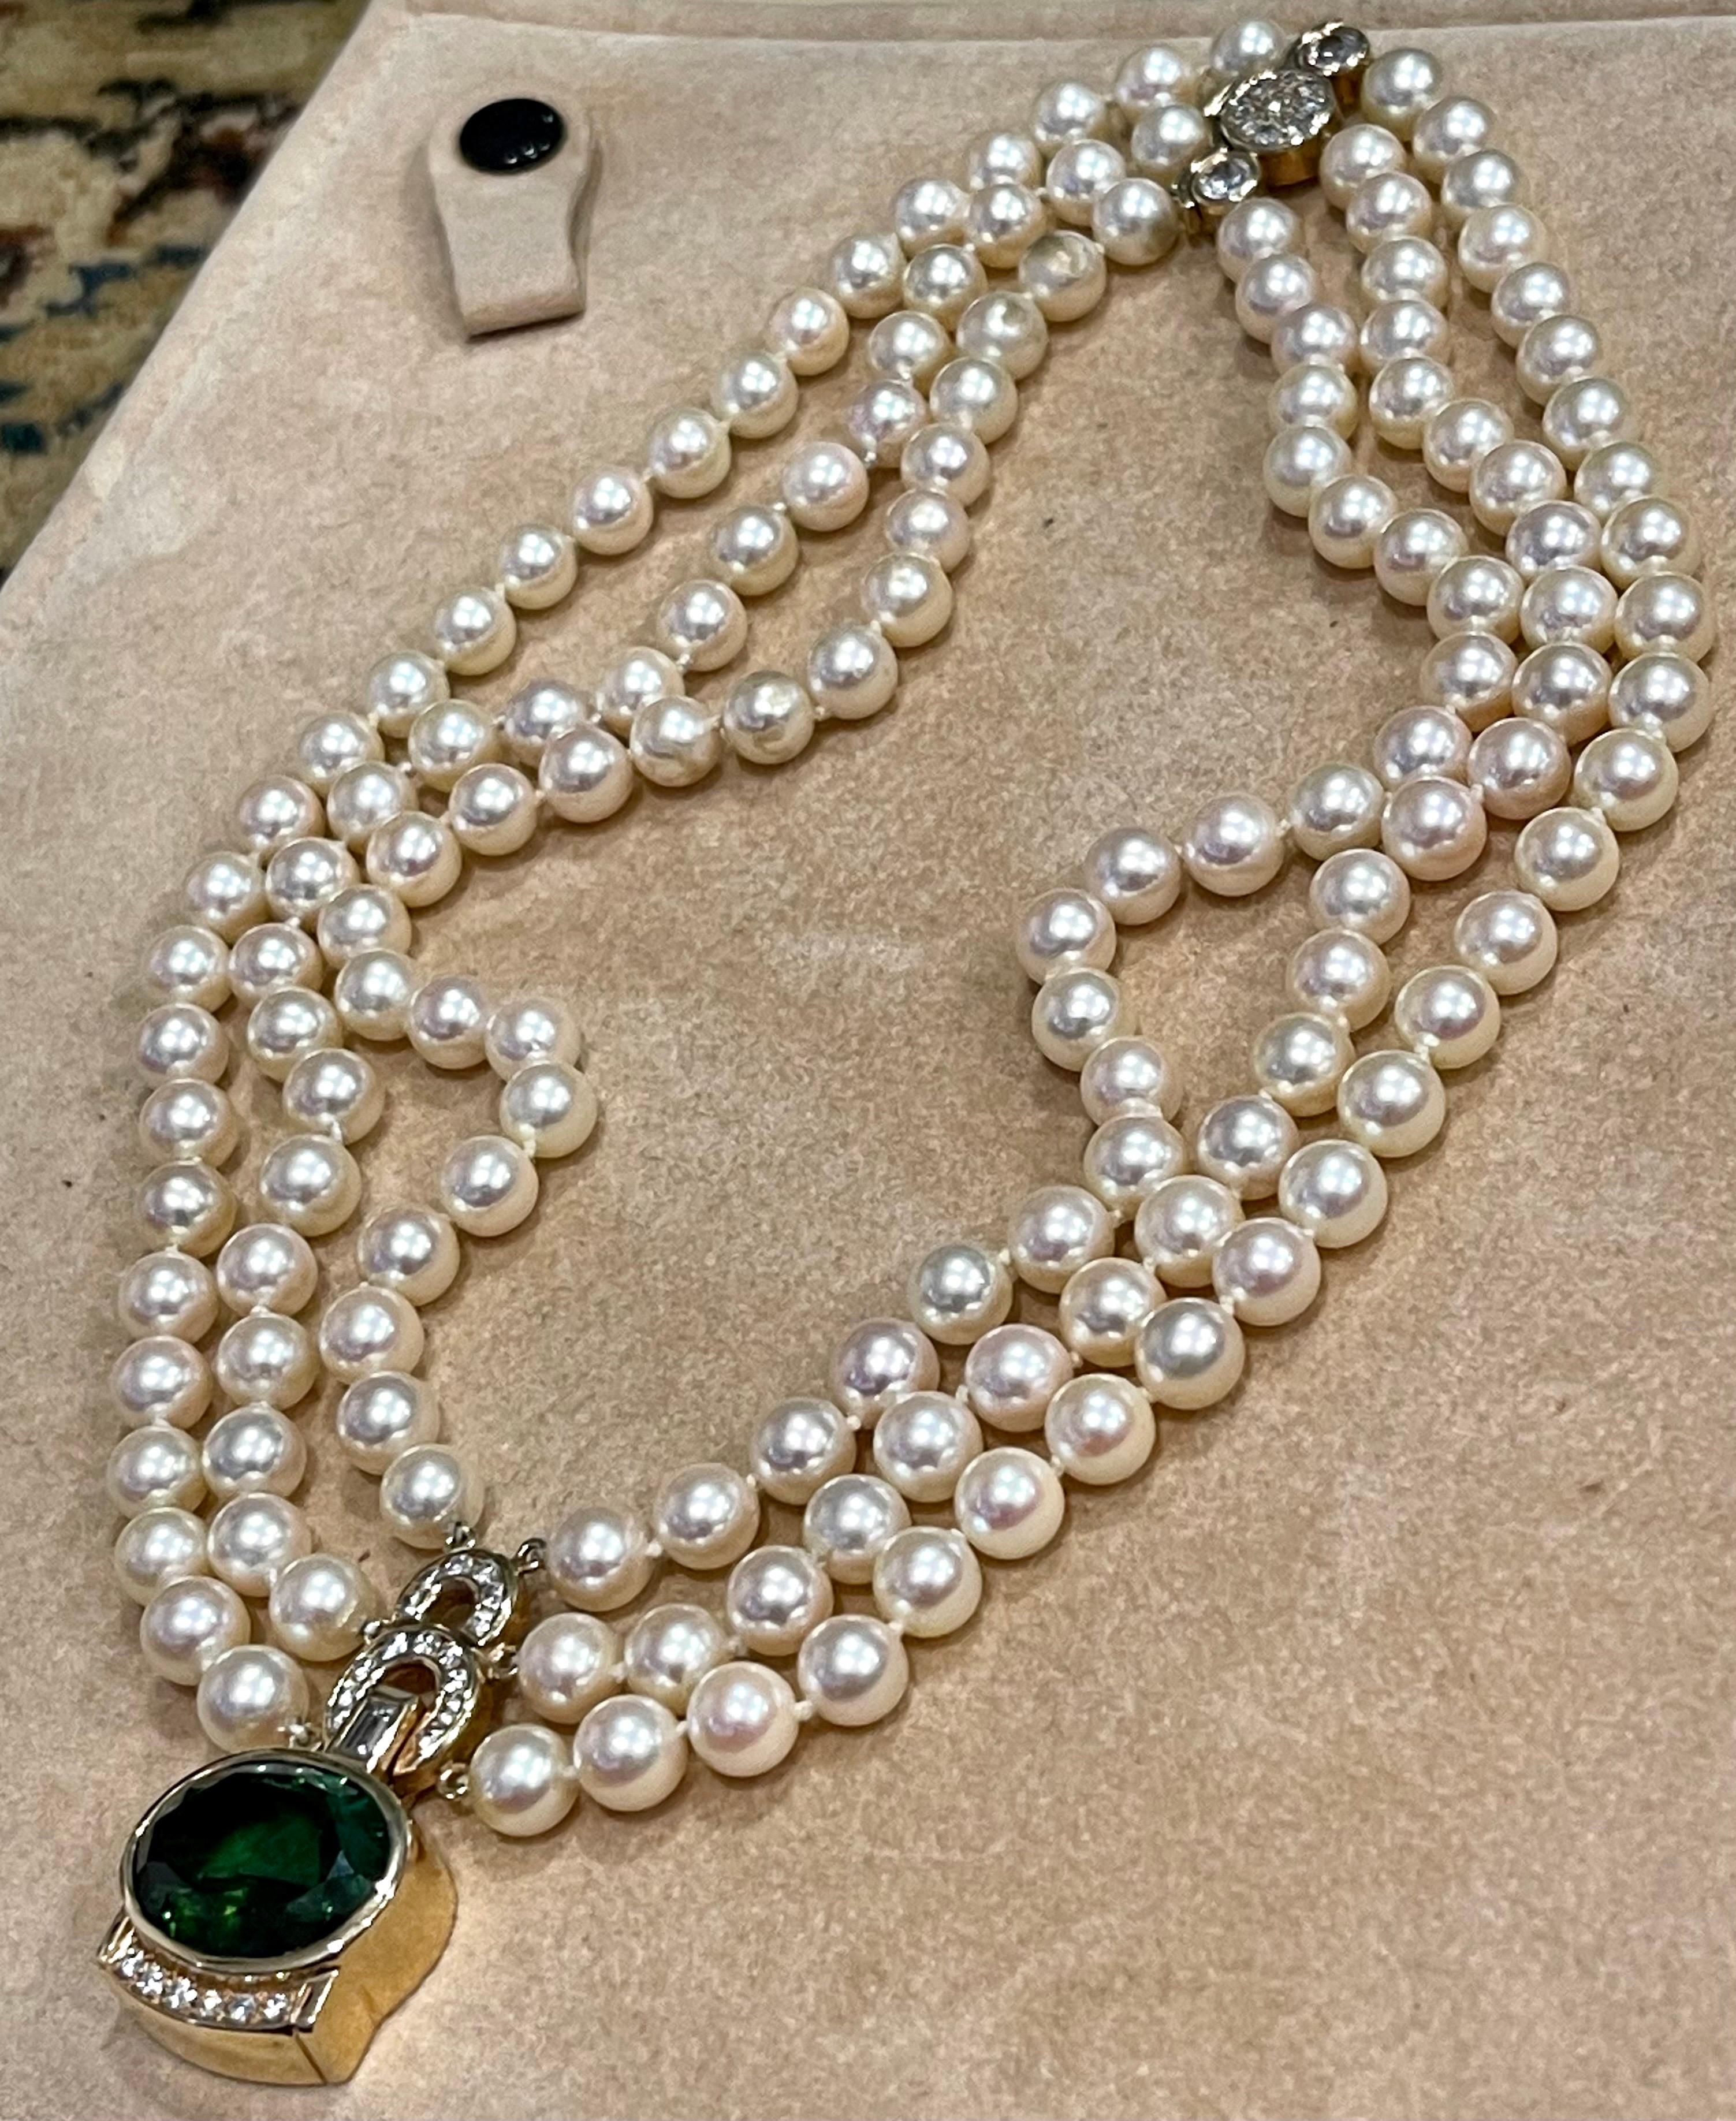 18Ct Green Tourmaline & 2.5Ct Diamond Necklace 14 KY Gold & Triple Pearl Layers For Sale 6